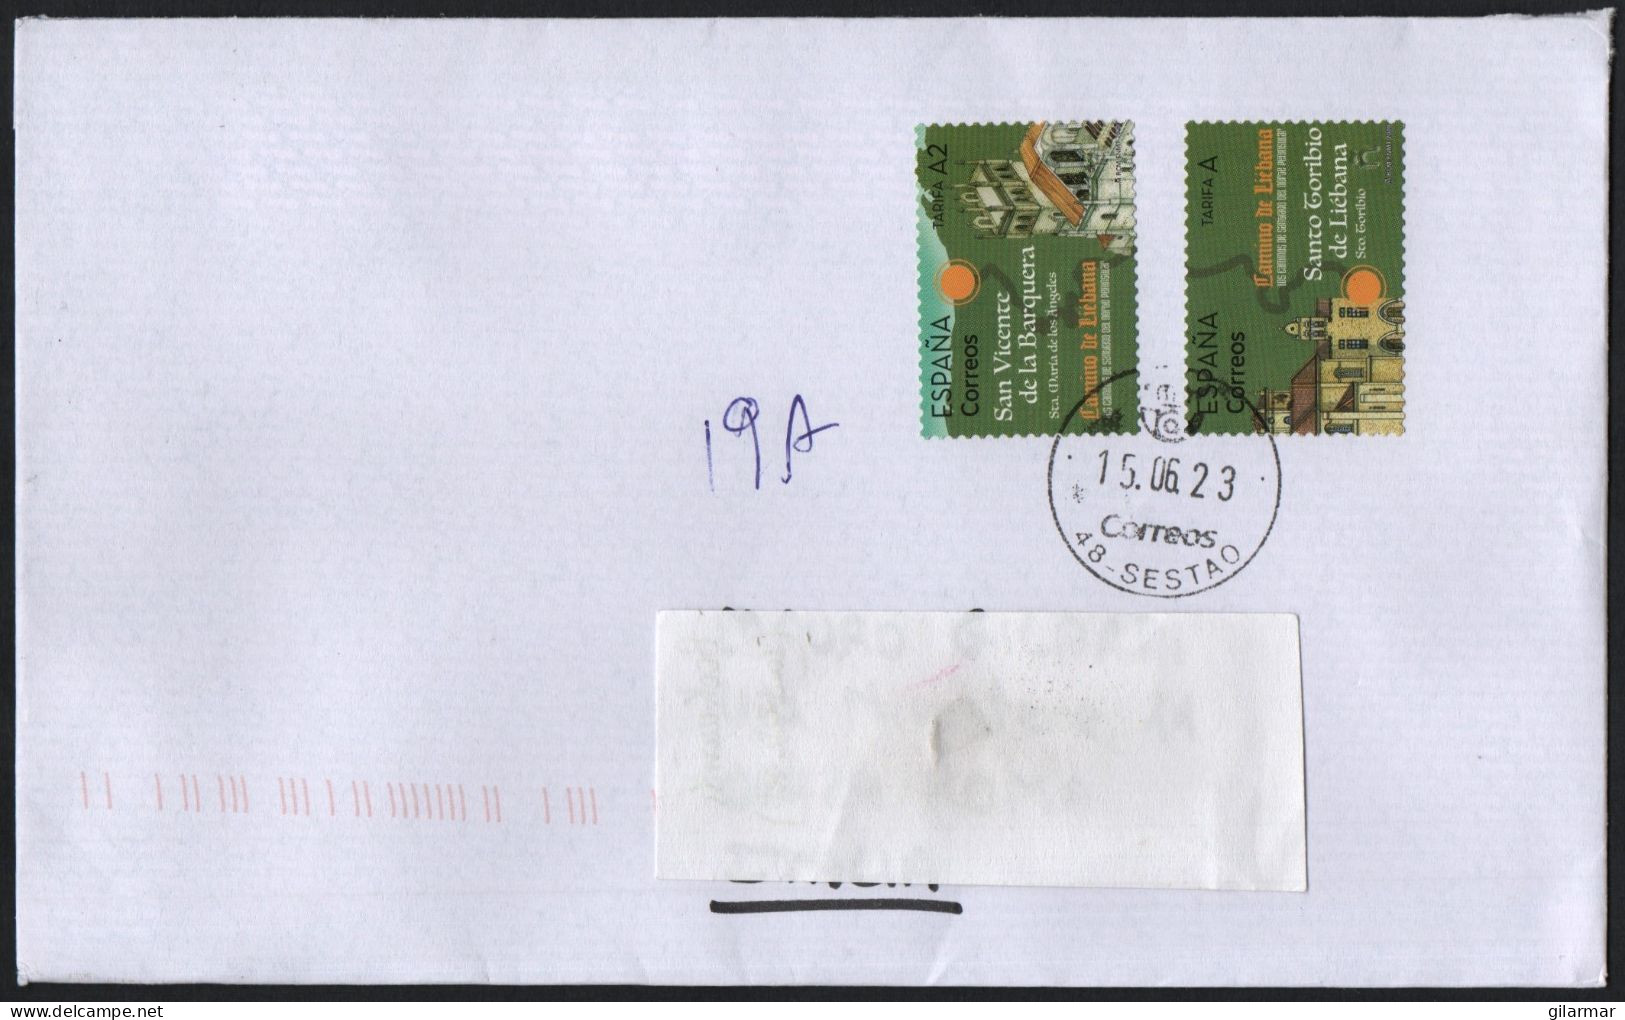 SPAIN 2023 - MAILED ENVELOPE - THE ROUTE OF ST. JAMES' WAY IN NORTHERN SPAIN - Storia Postale